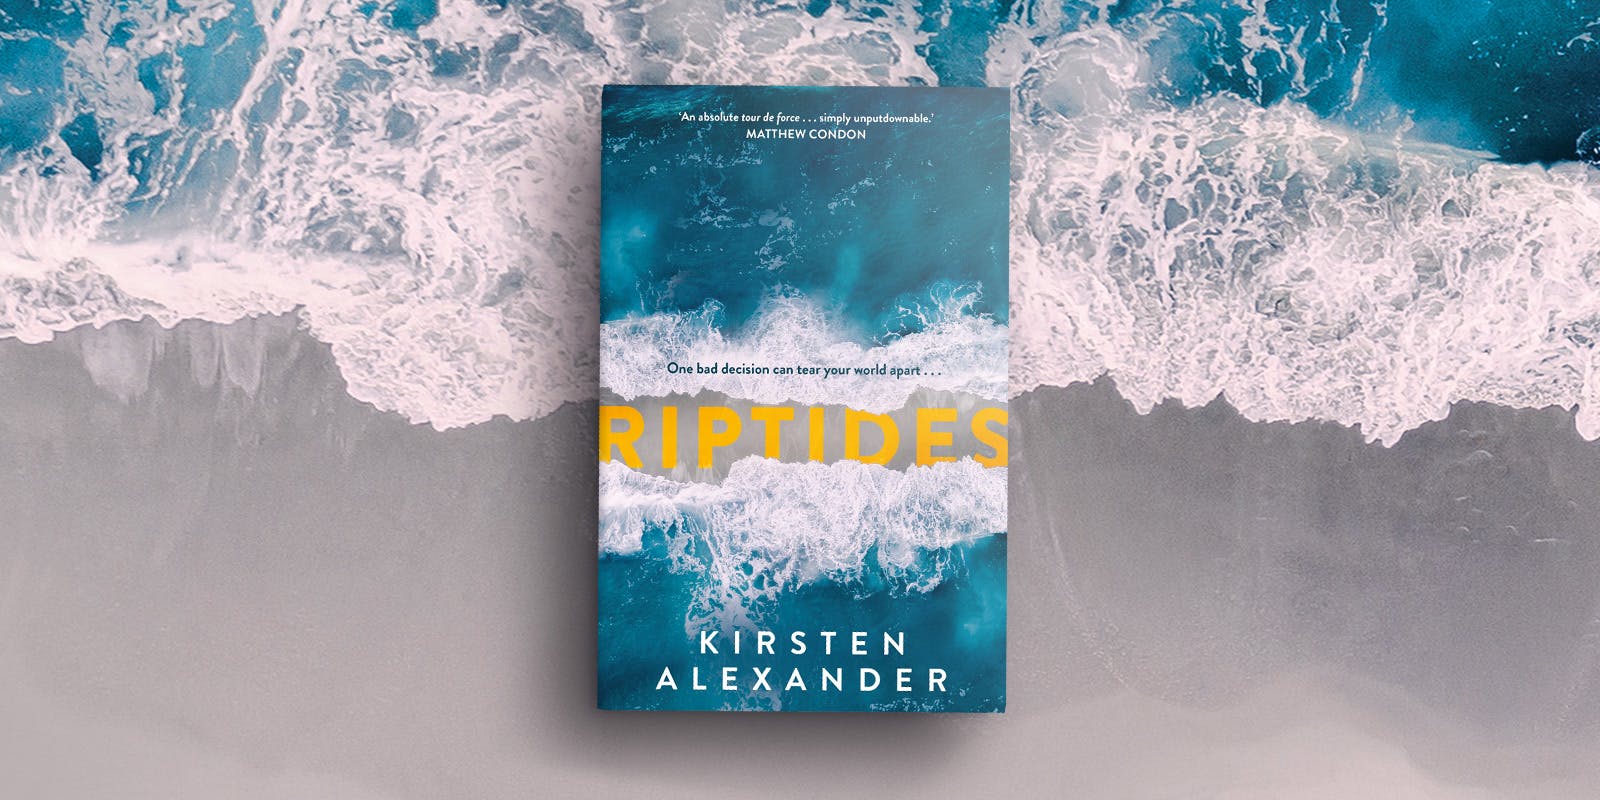 Riptides book club notes